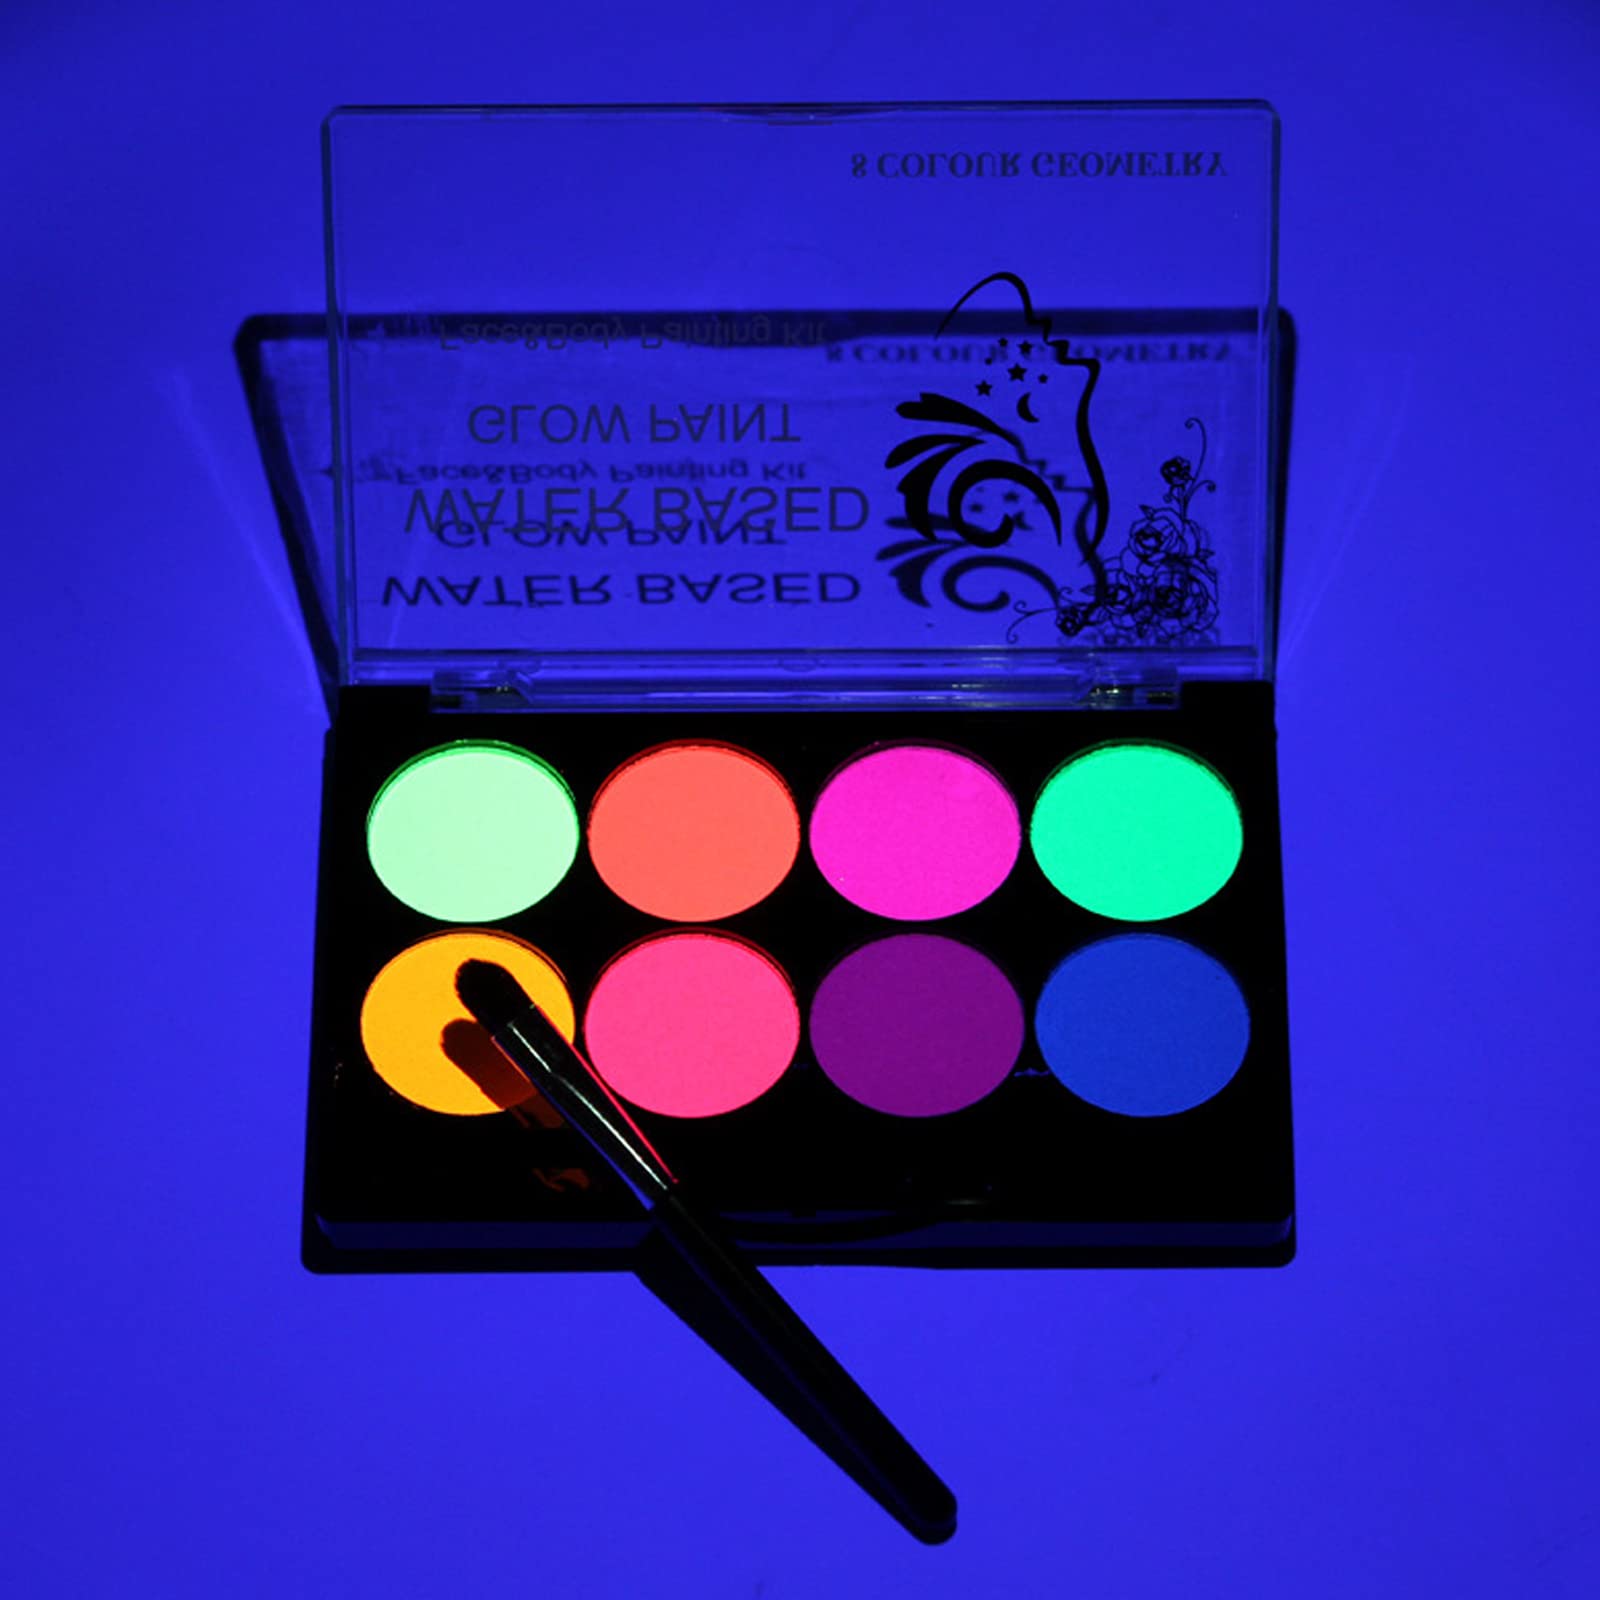 MEICOLY Glow UV Blacklight Face Paint, 8 Bright Colors Neon Fluorescent Body Painting Palette,Water Activated Eyeliner,Water Based Glow In The Dark Party Halloween Washable for Kids Adult Body Paint